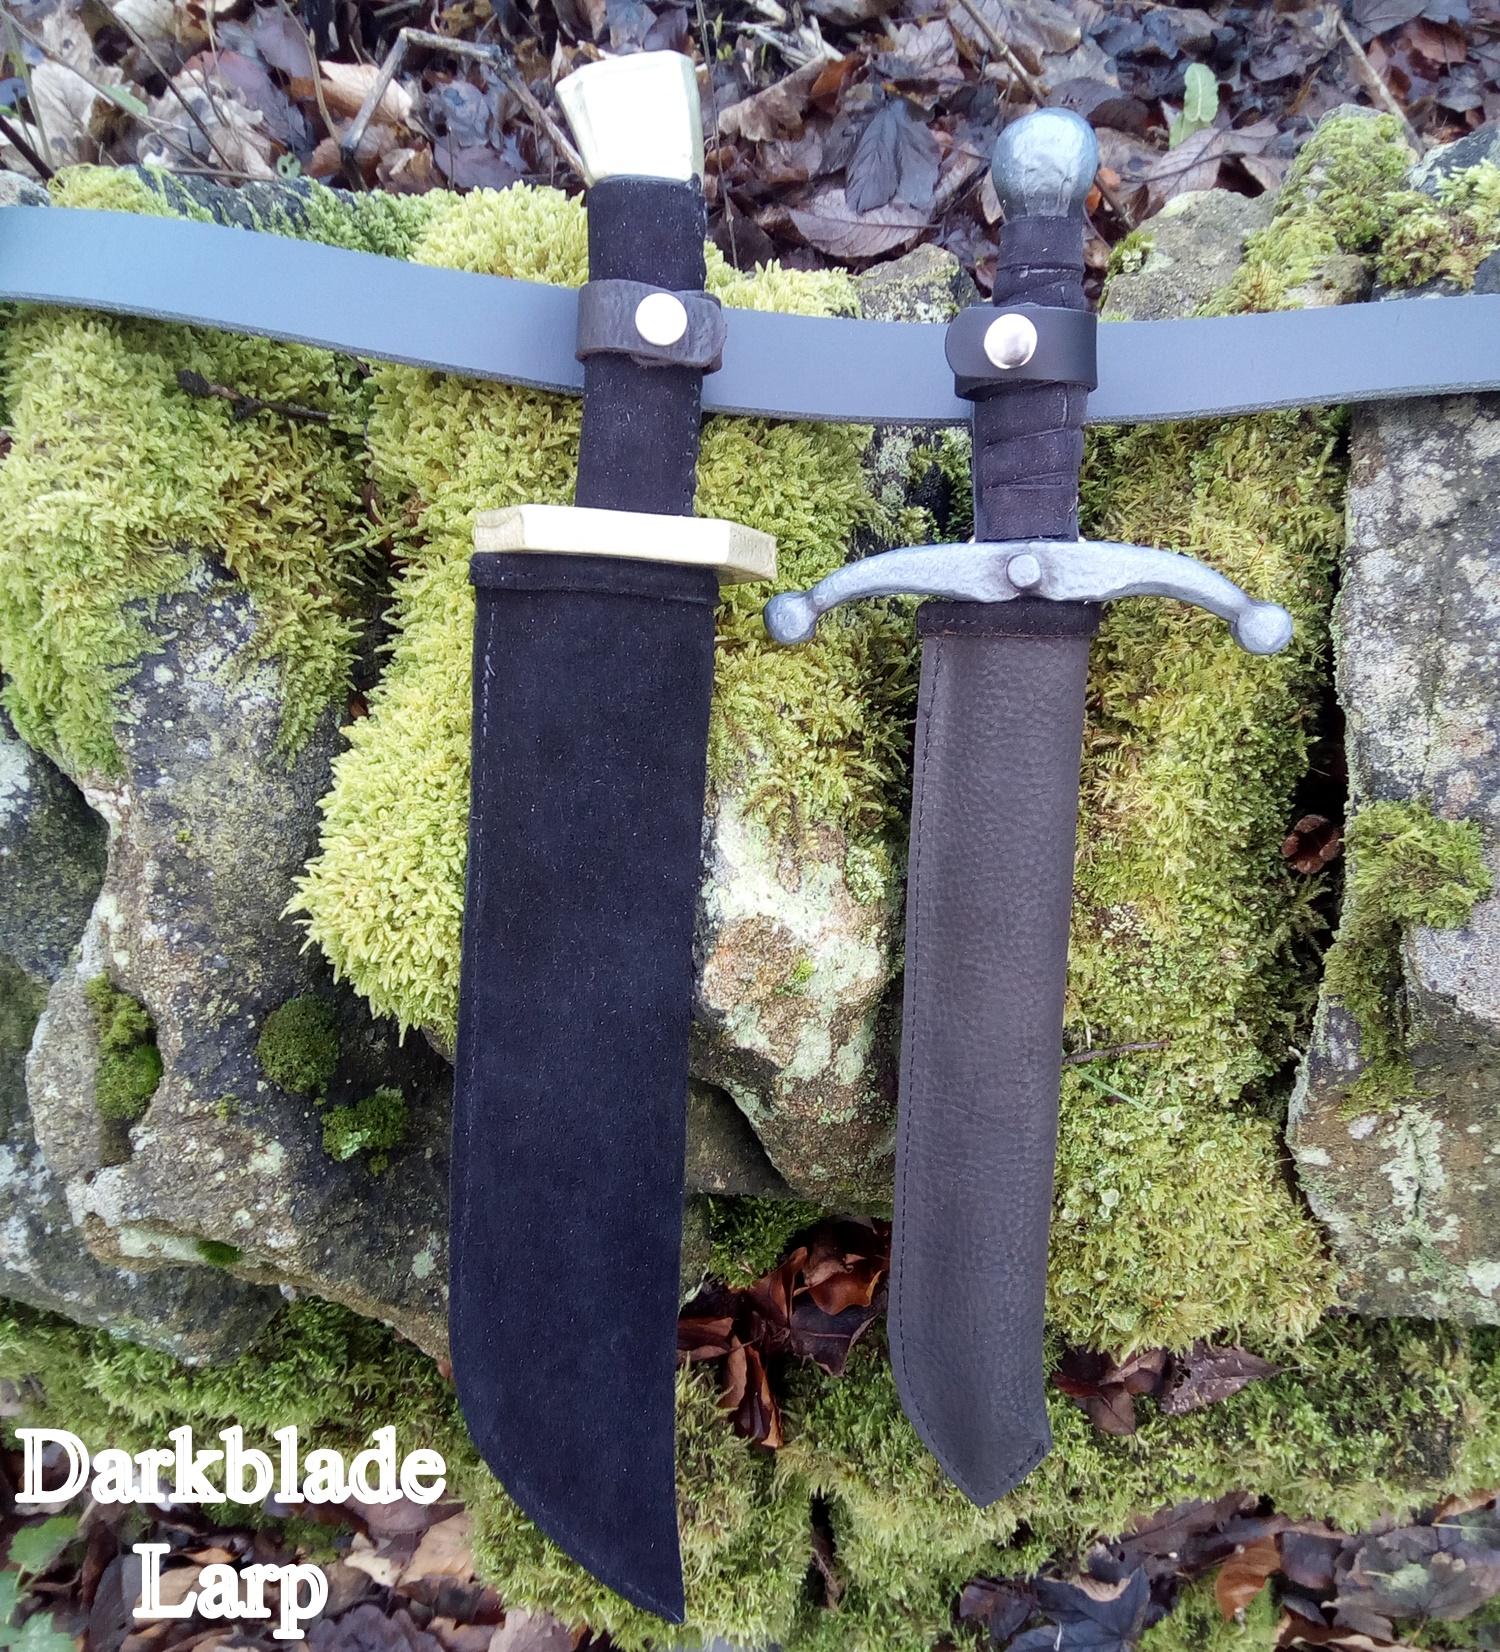 Two full dagger scabbards with daggers in them